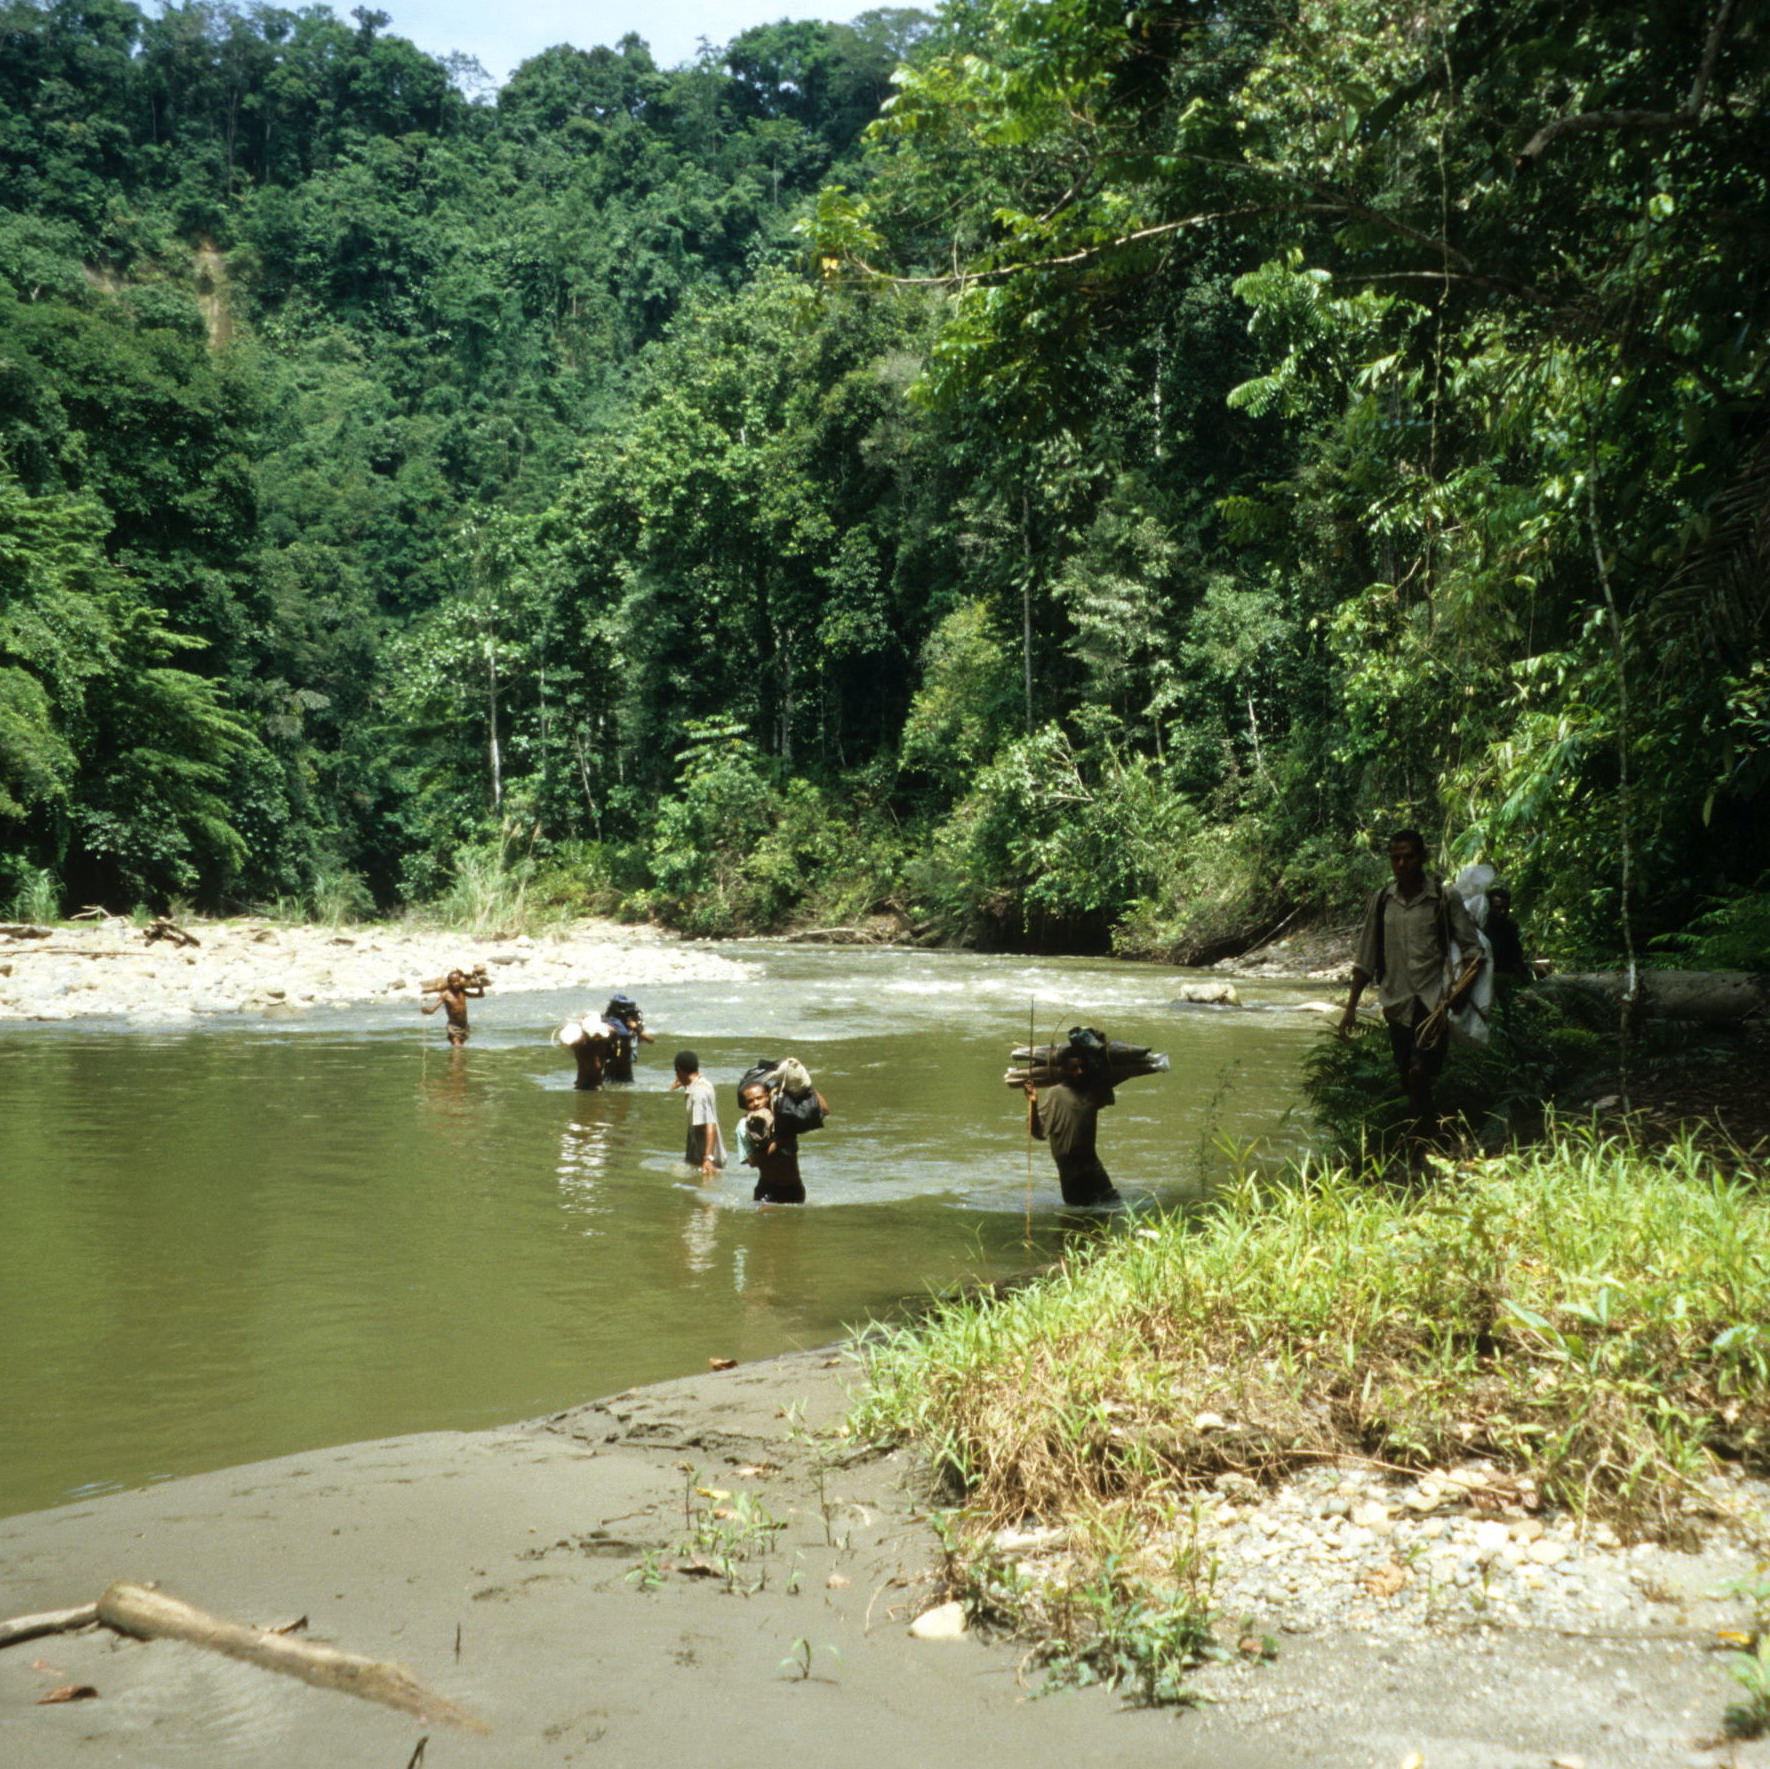 River Crossing West Sepik Province, New Guinea Art, Oceanic Art, Tribal Art, South Pacific Collecting